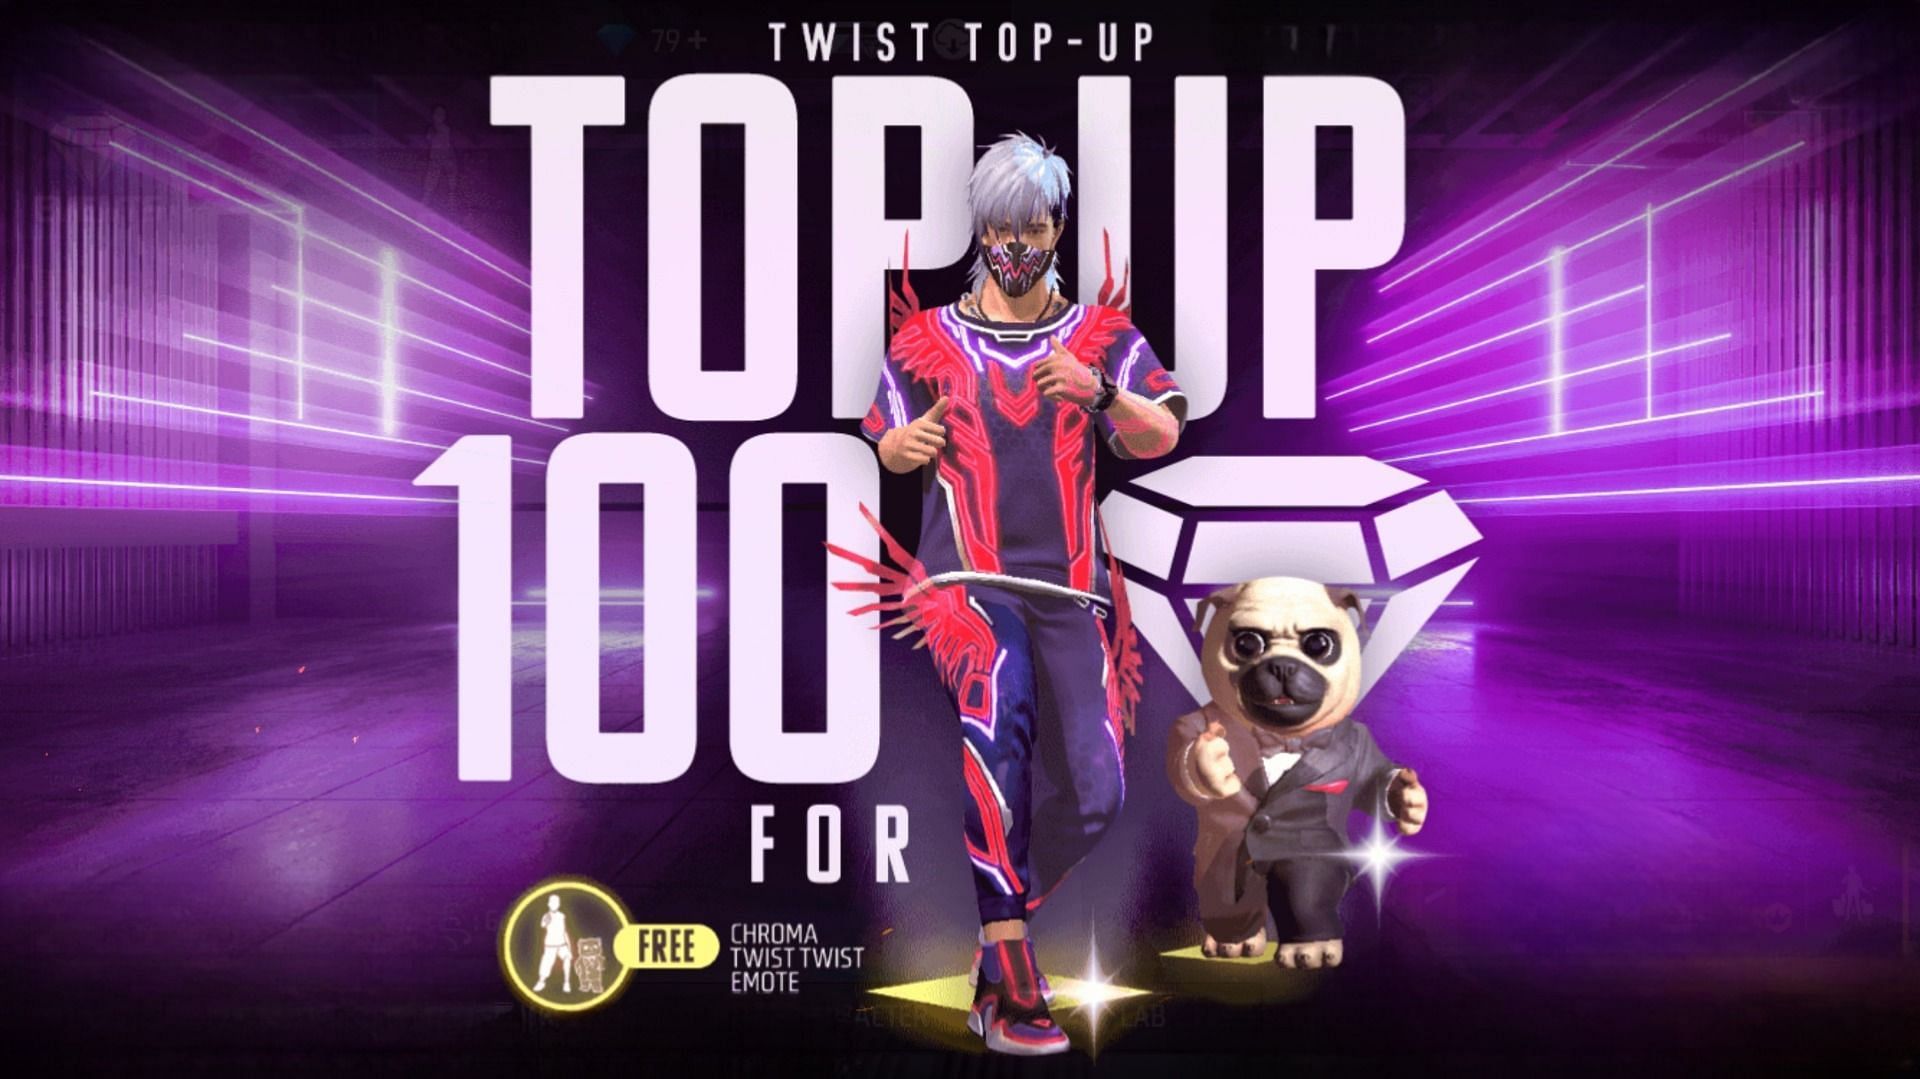 Free Fire MAX TWIST Top-Up event is now available (Image via Garena)